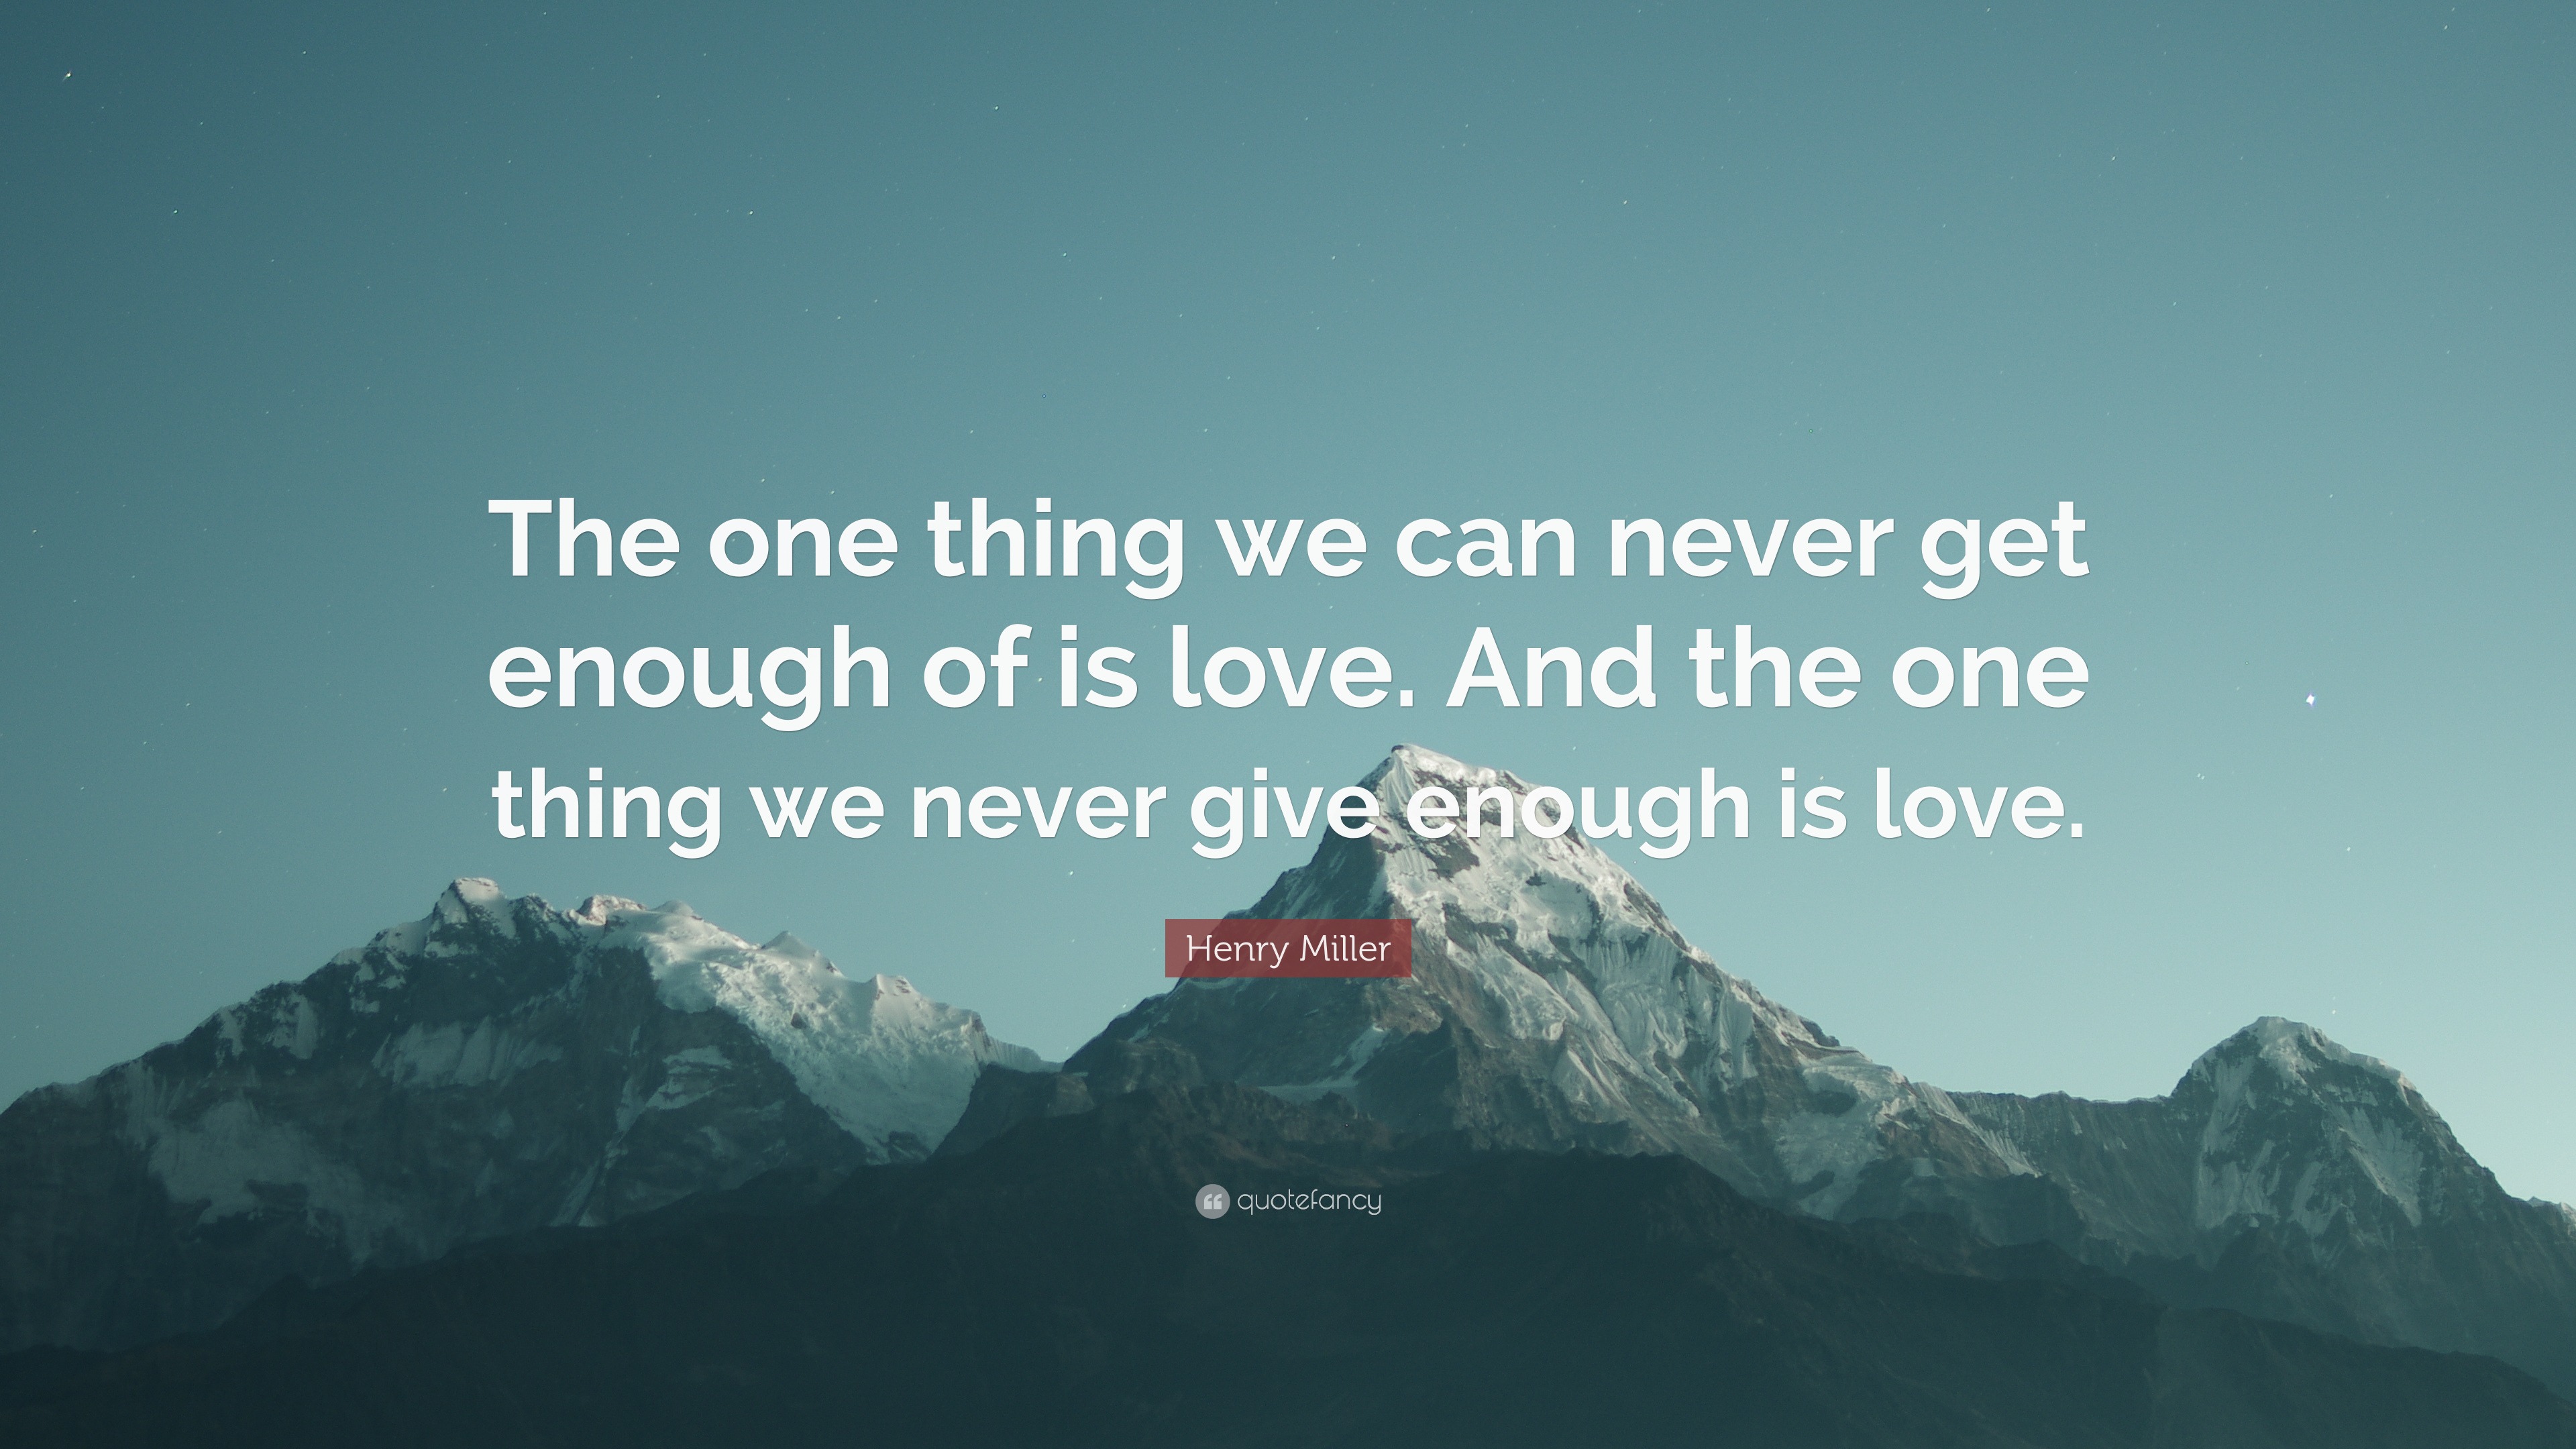 Henry Miller Quote “the One Thing We Can Never Get Enough Of Is Love And The One Thing We